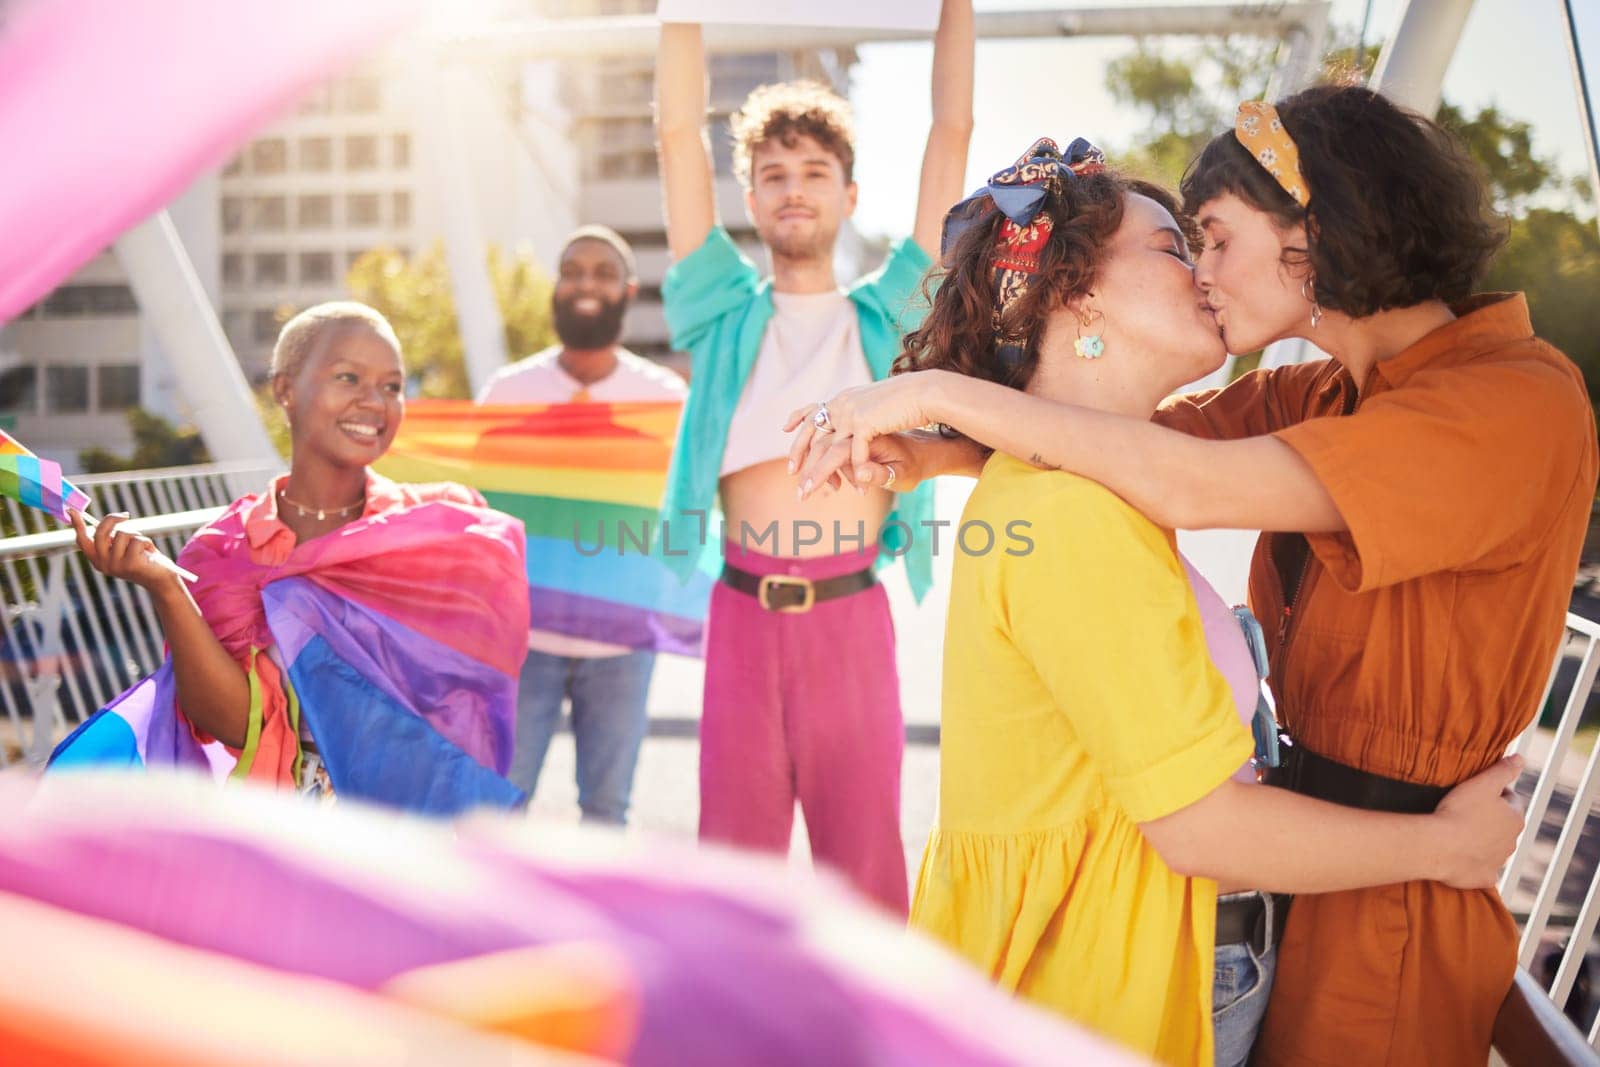 Lgbt, kiss and couple of friends in city with rainbow flag for support, queer celebration and relationship. Diversity, lgbtq community and group of people enjoy freedom, happiness and pride identity by YuriArcurs